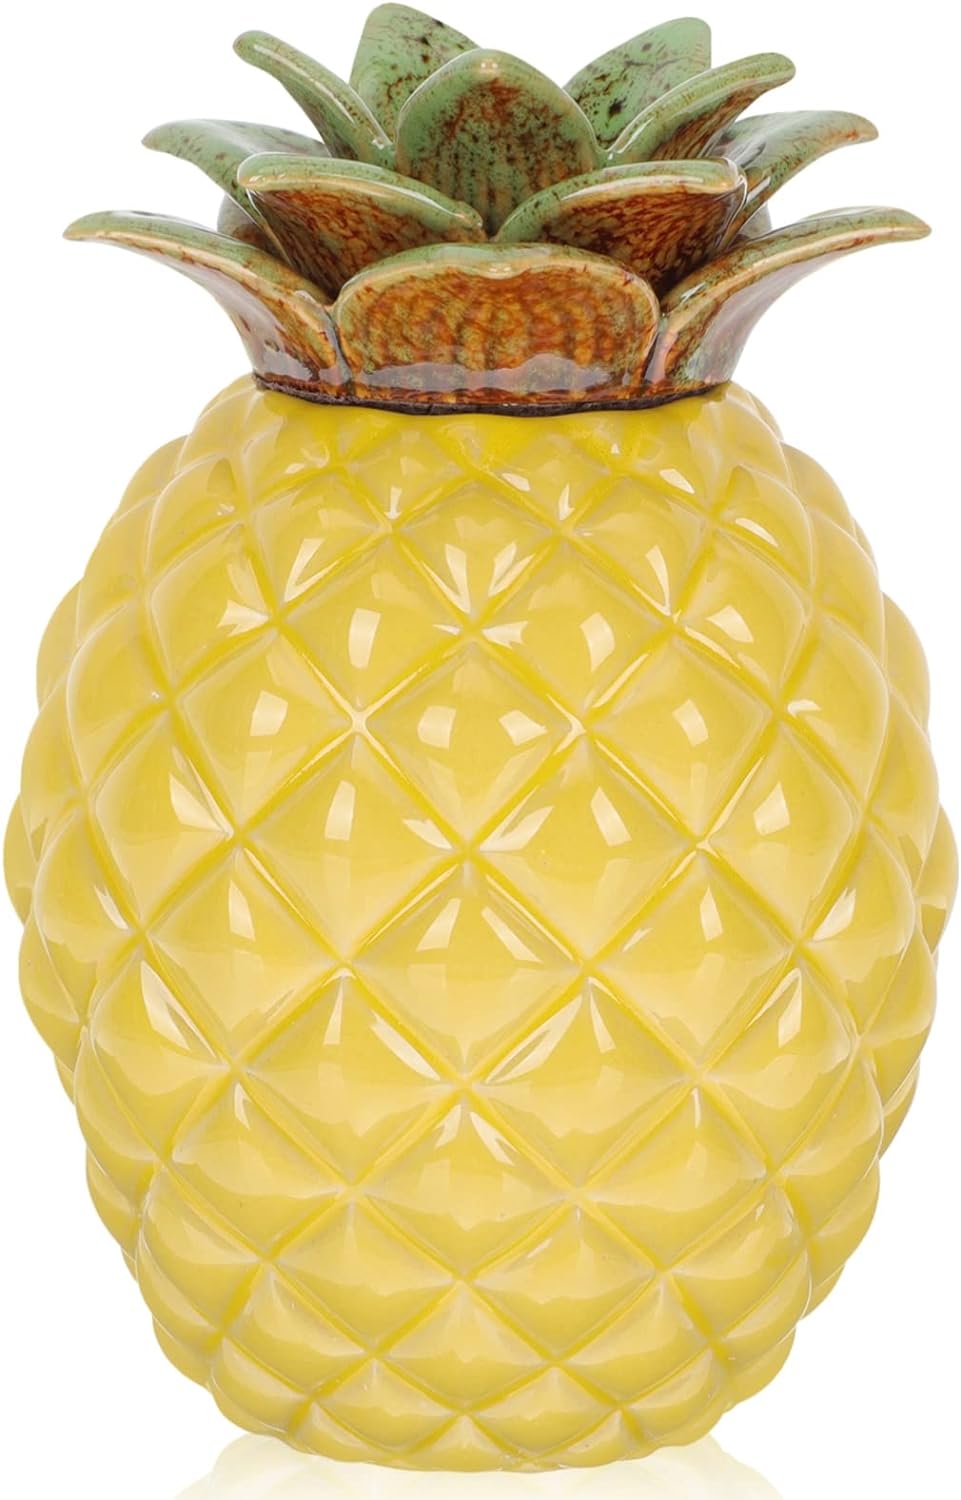 Zerodeko Pineapple Cookie Jar Ceramic Storage Container Candy Dish Food Storage Jar with Lid for Loose Tea Coffee Sugar Spices Nuts Yellow